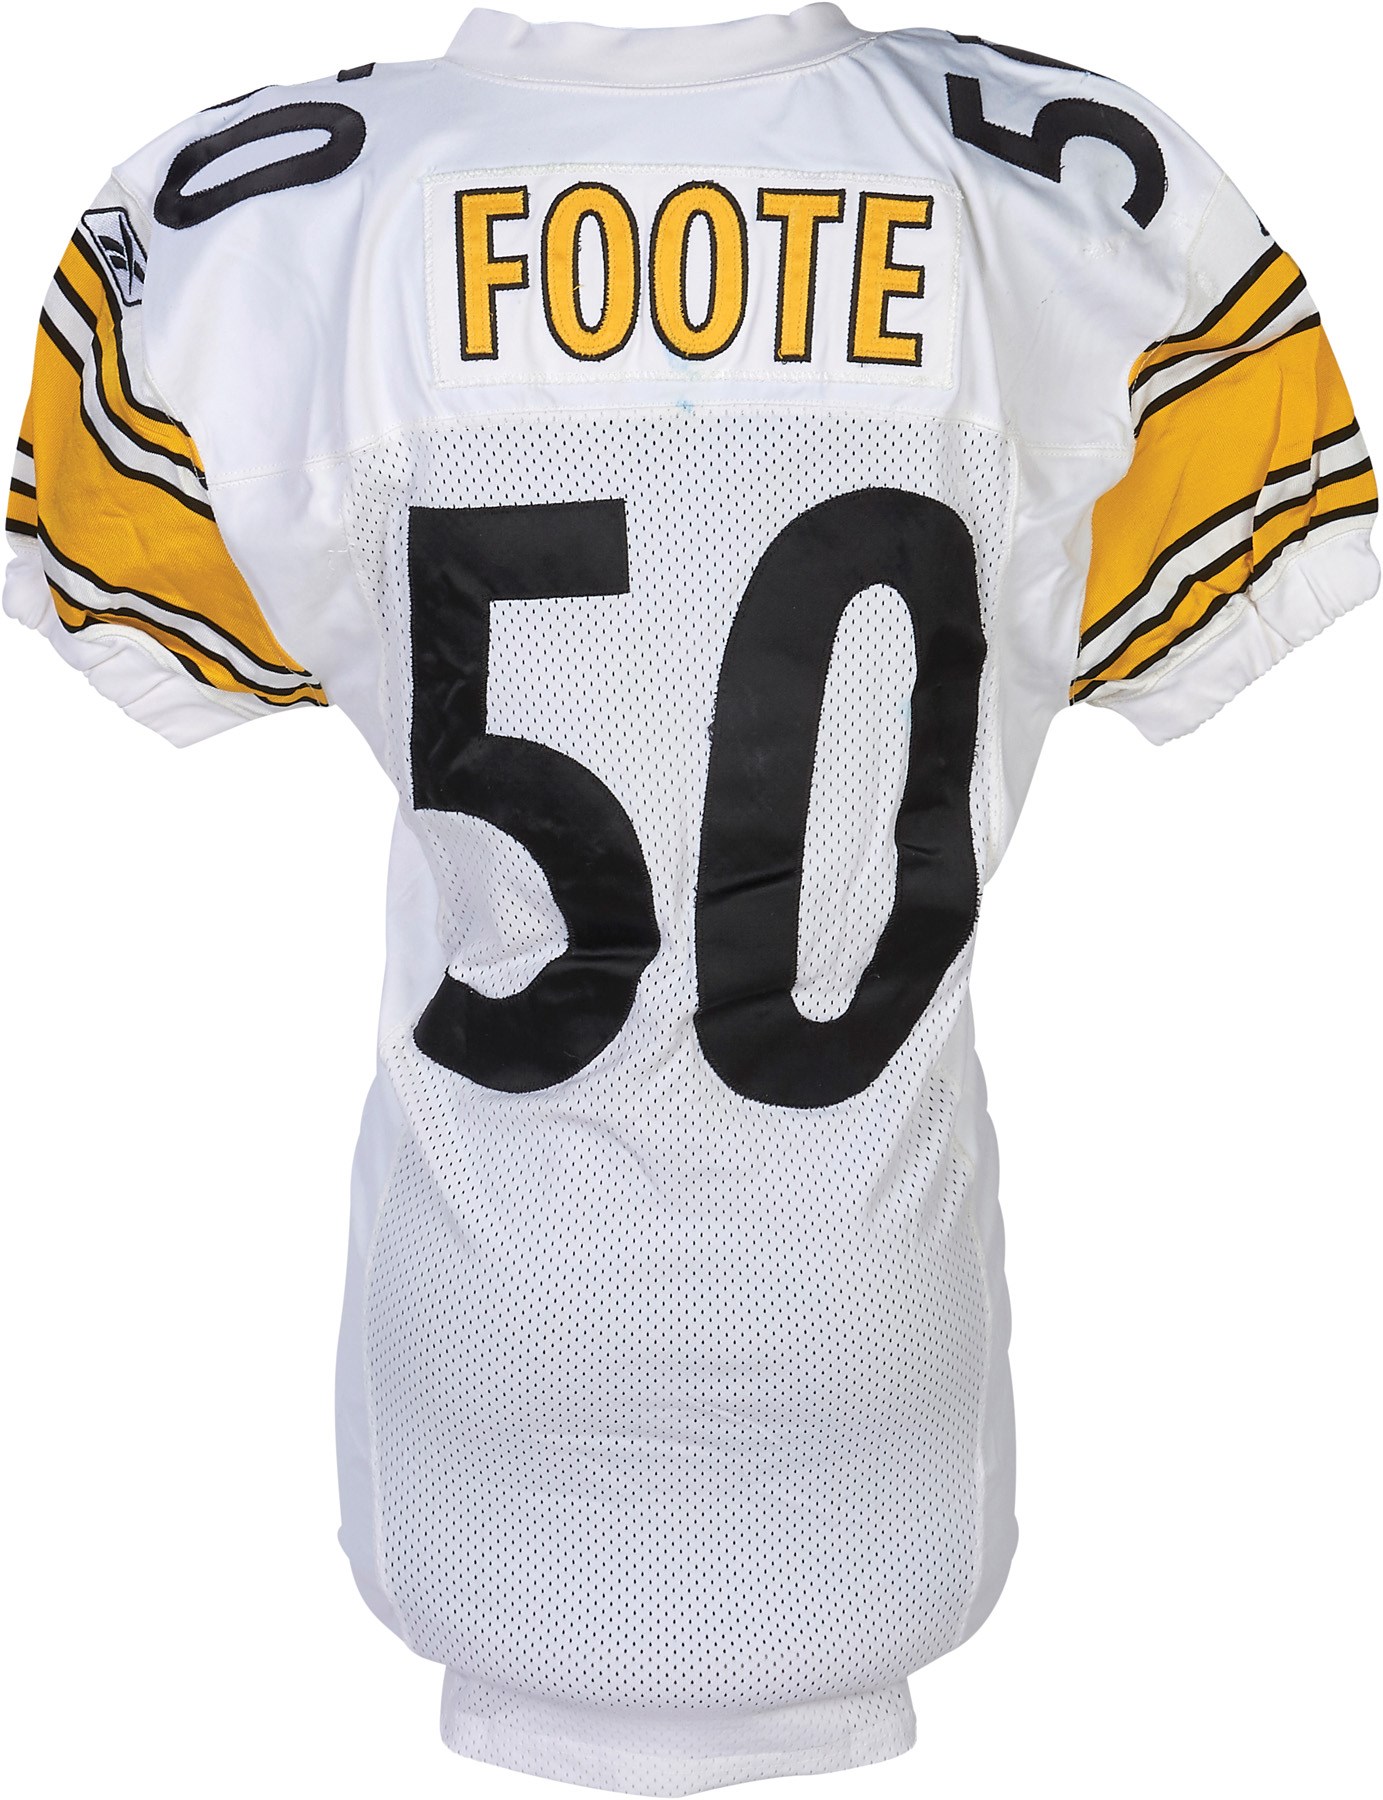 2002 Larry Foote Pittsburgh Steelers AFC Divisional Game Worn Jersey (Photo-Matched)